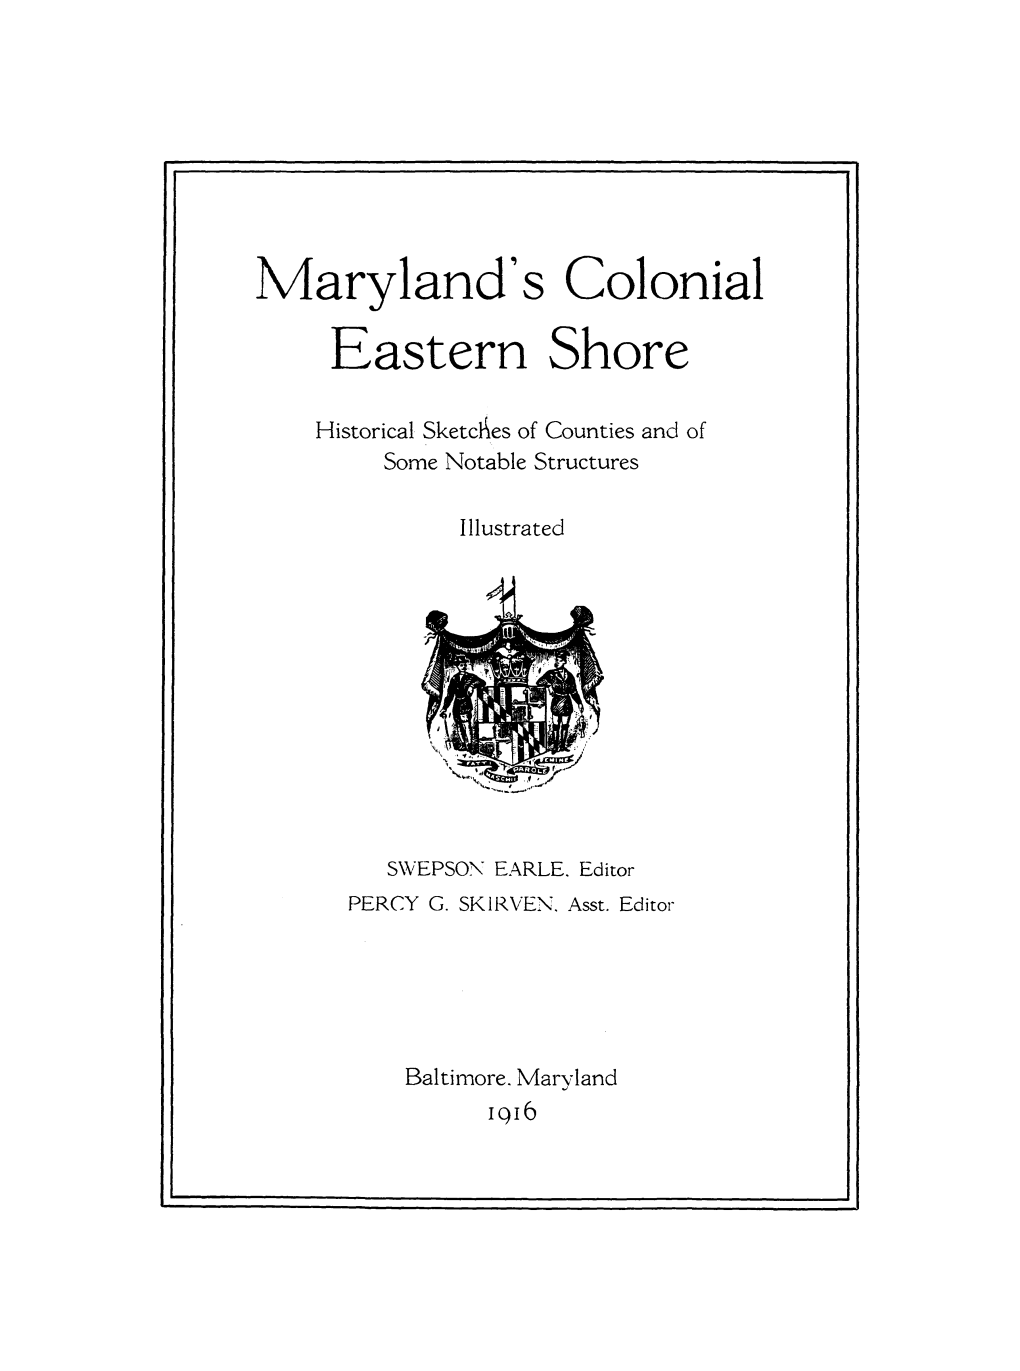 Maryland's Colonial Eastern Shore